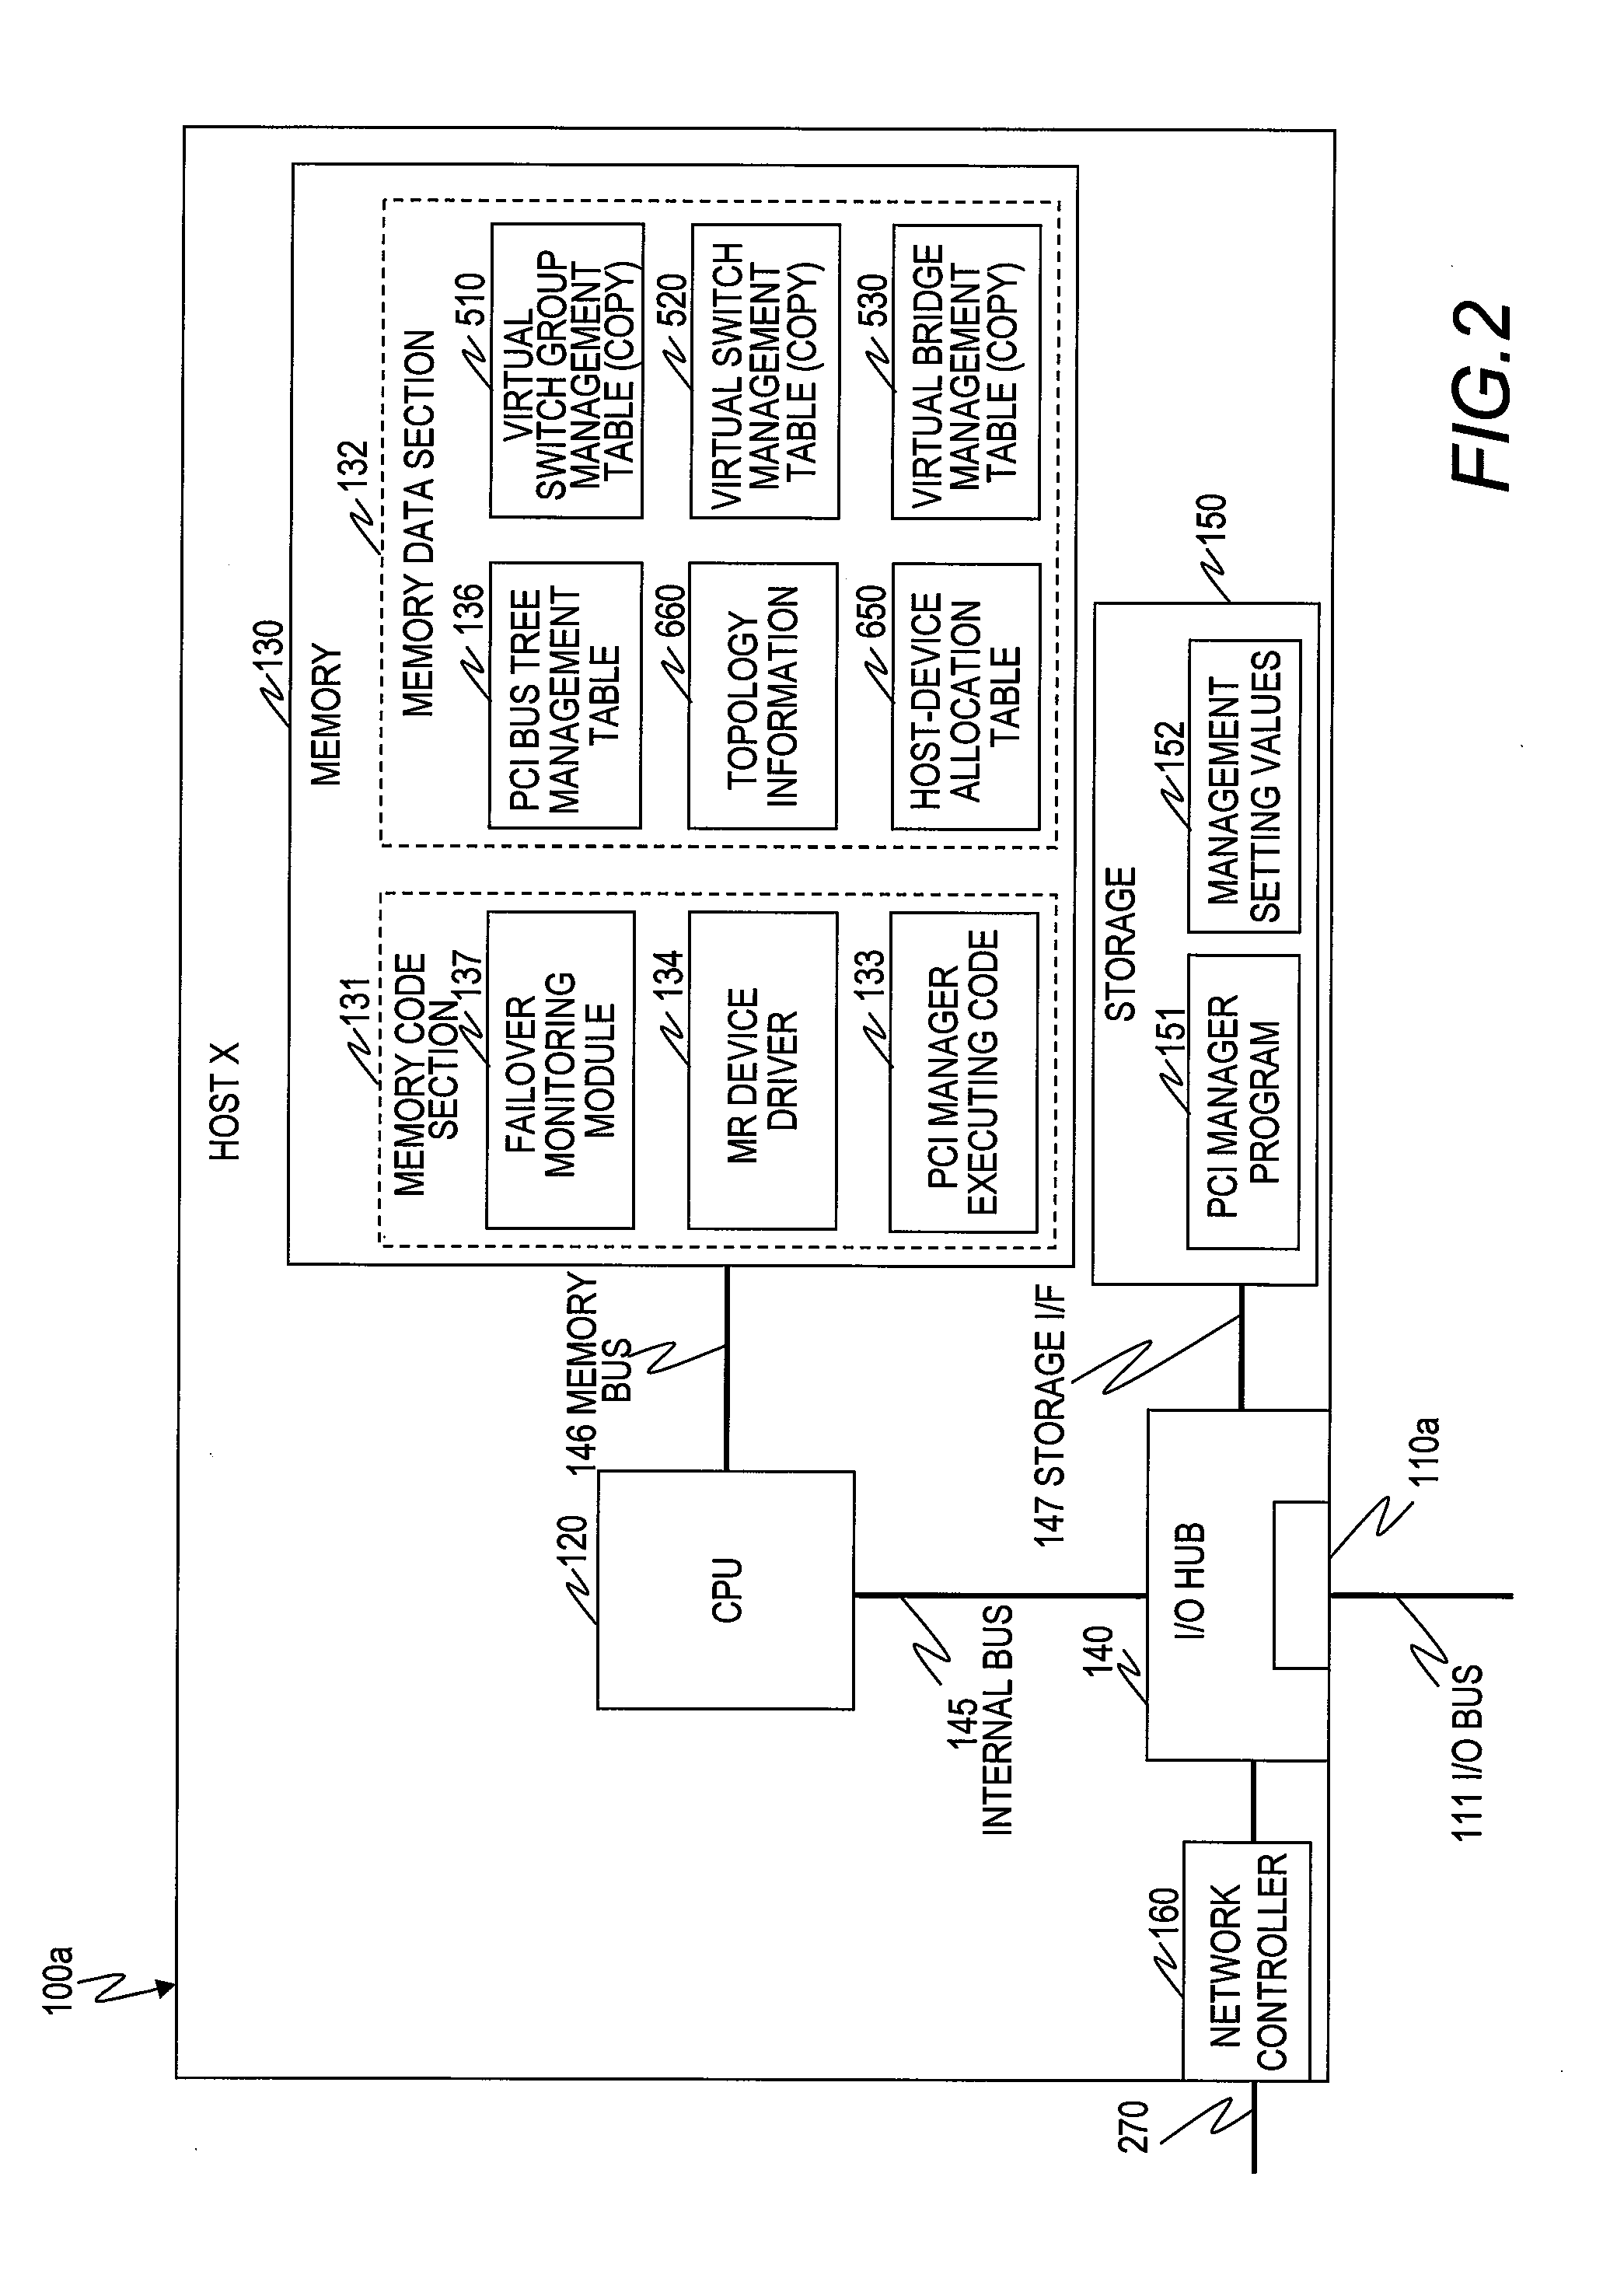 Computer system managing I/O path and port